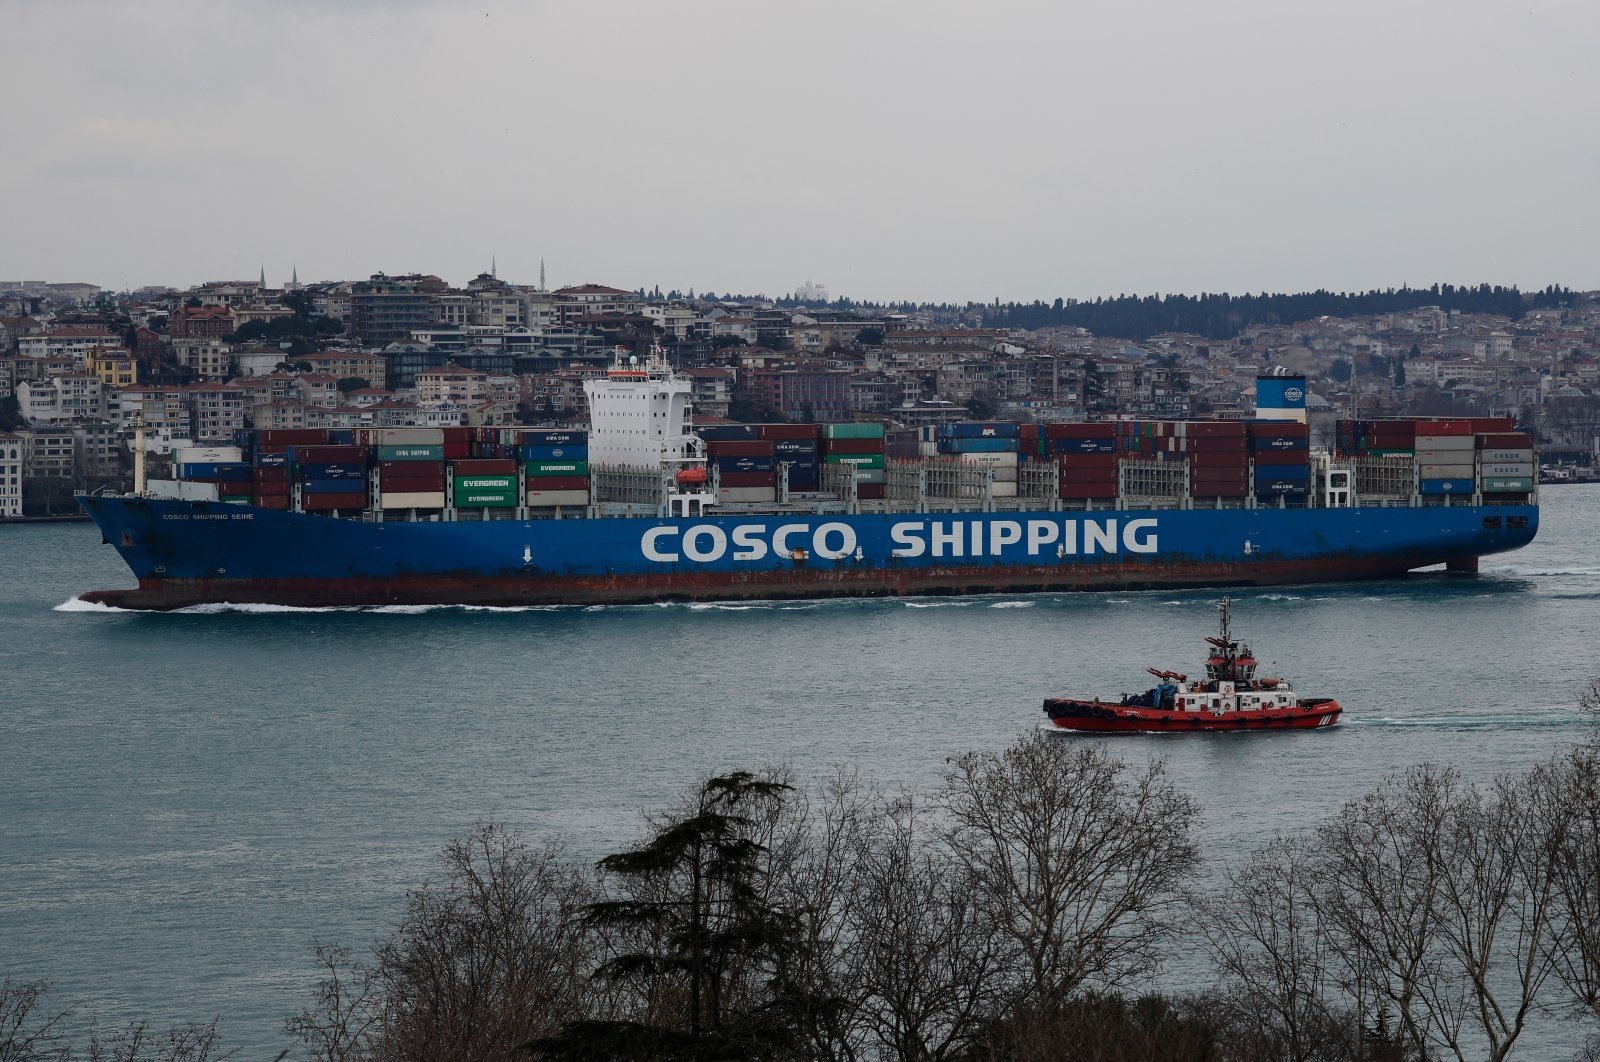 The Cosco Shipping Seine container ship of the China Ocean Shipping Company (COSCO) sails in the Bosporus on its way to the Black Sea, Istanbul, Turkey, March 3, 2022. (Reuters Photo)